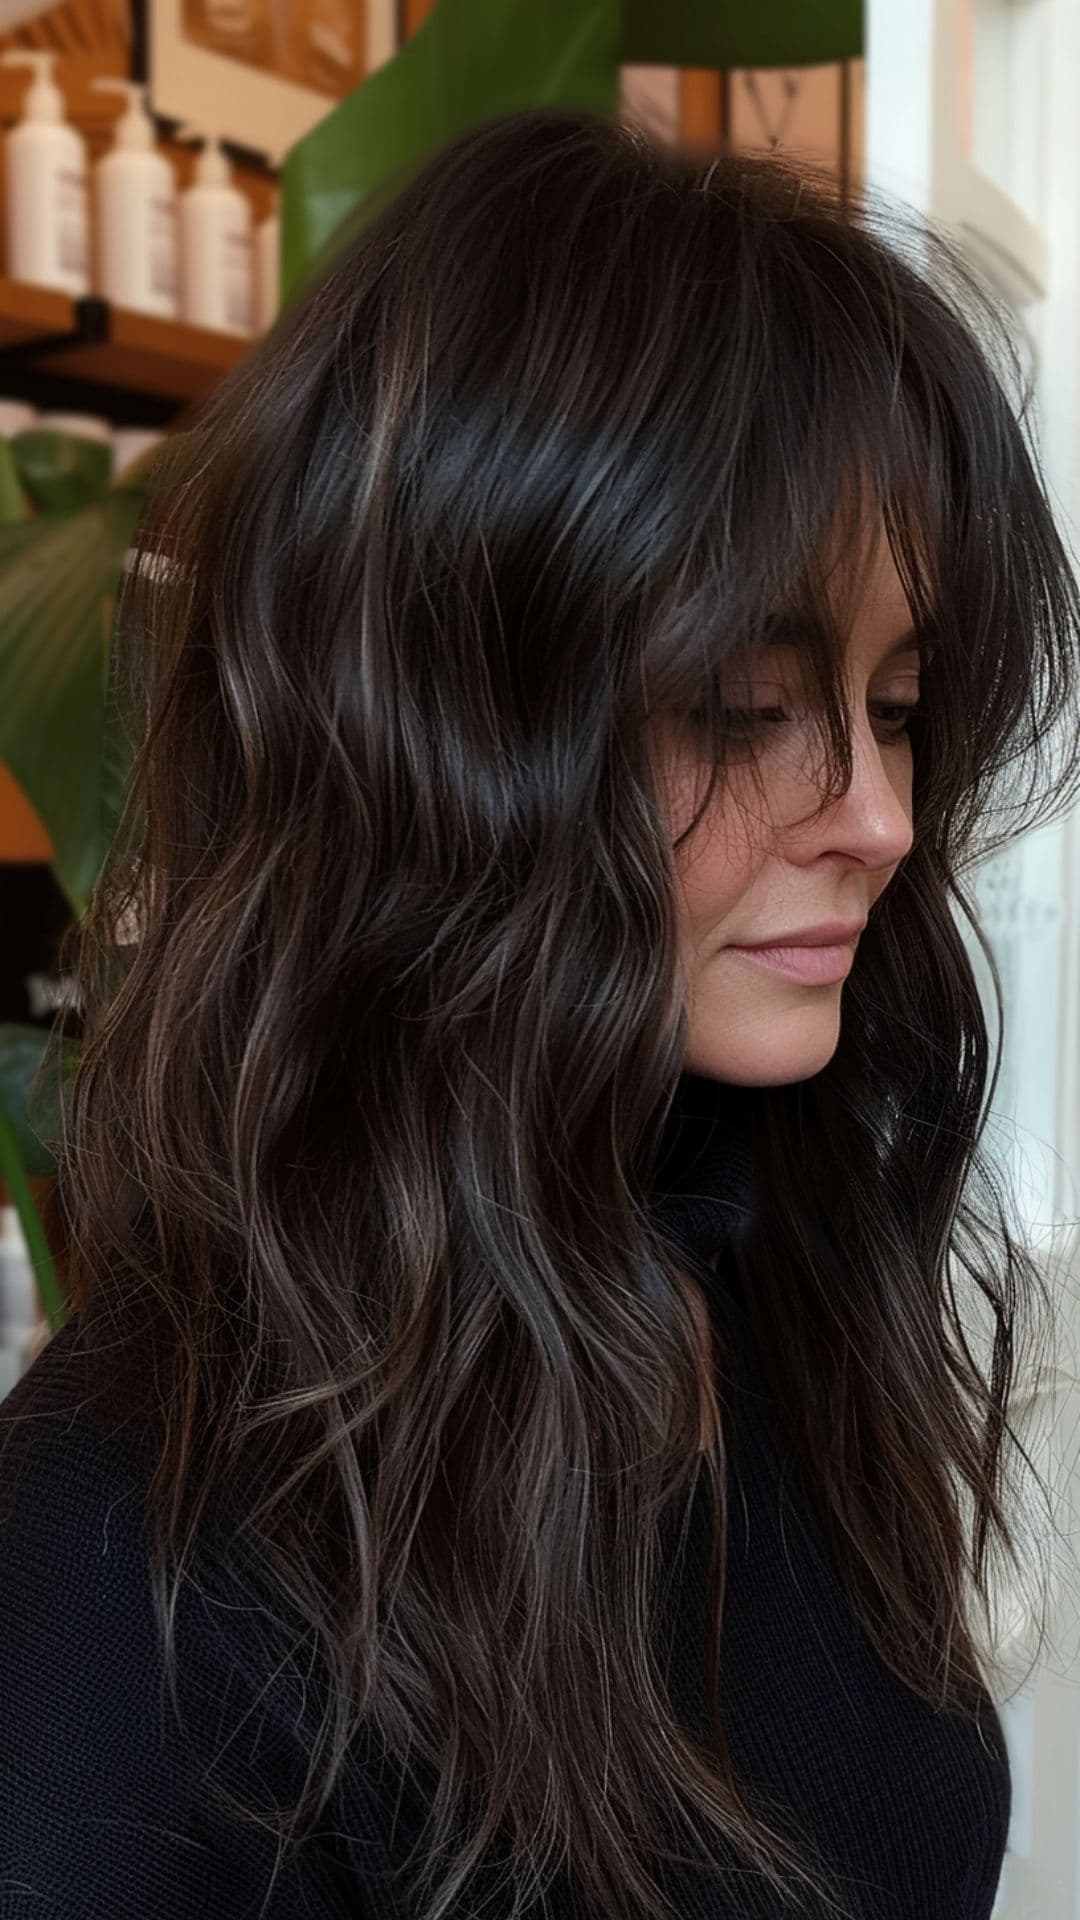 A woman modelling a textured beach waves with bangs.